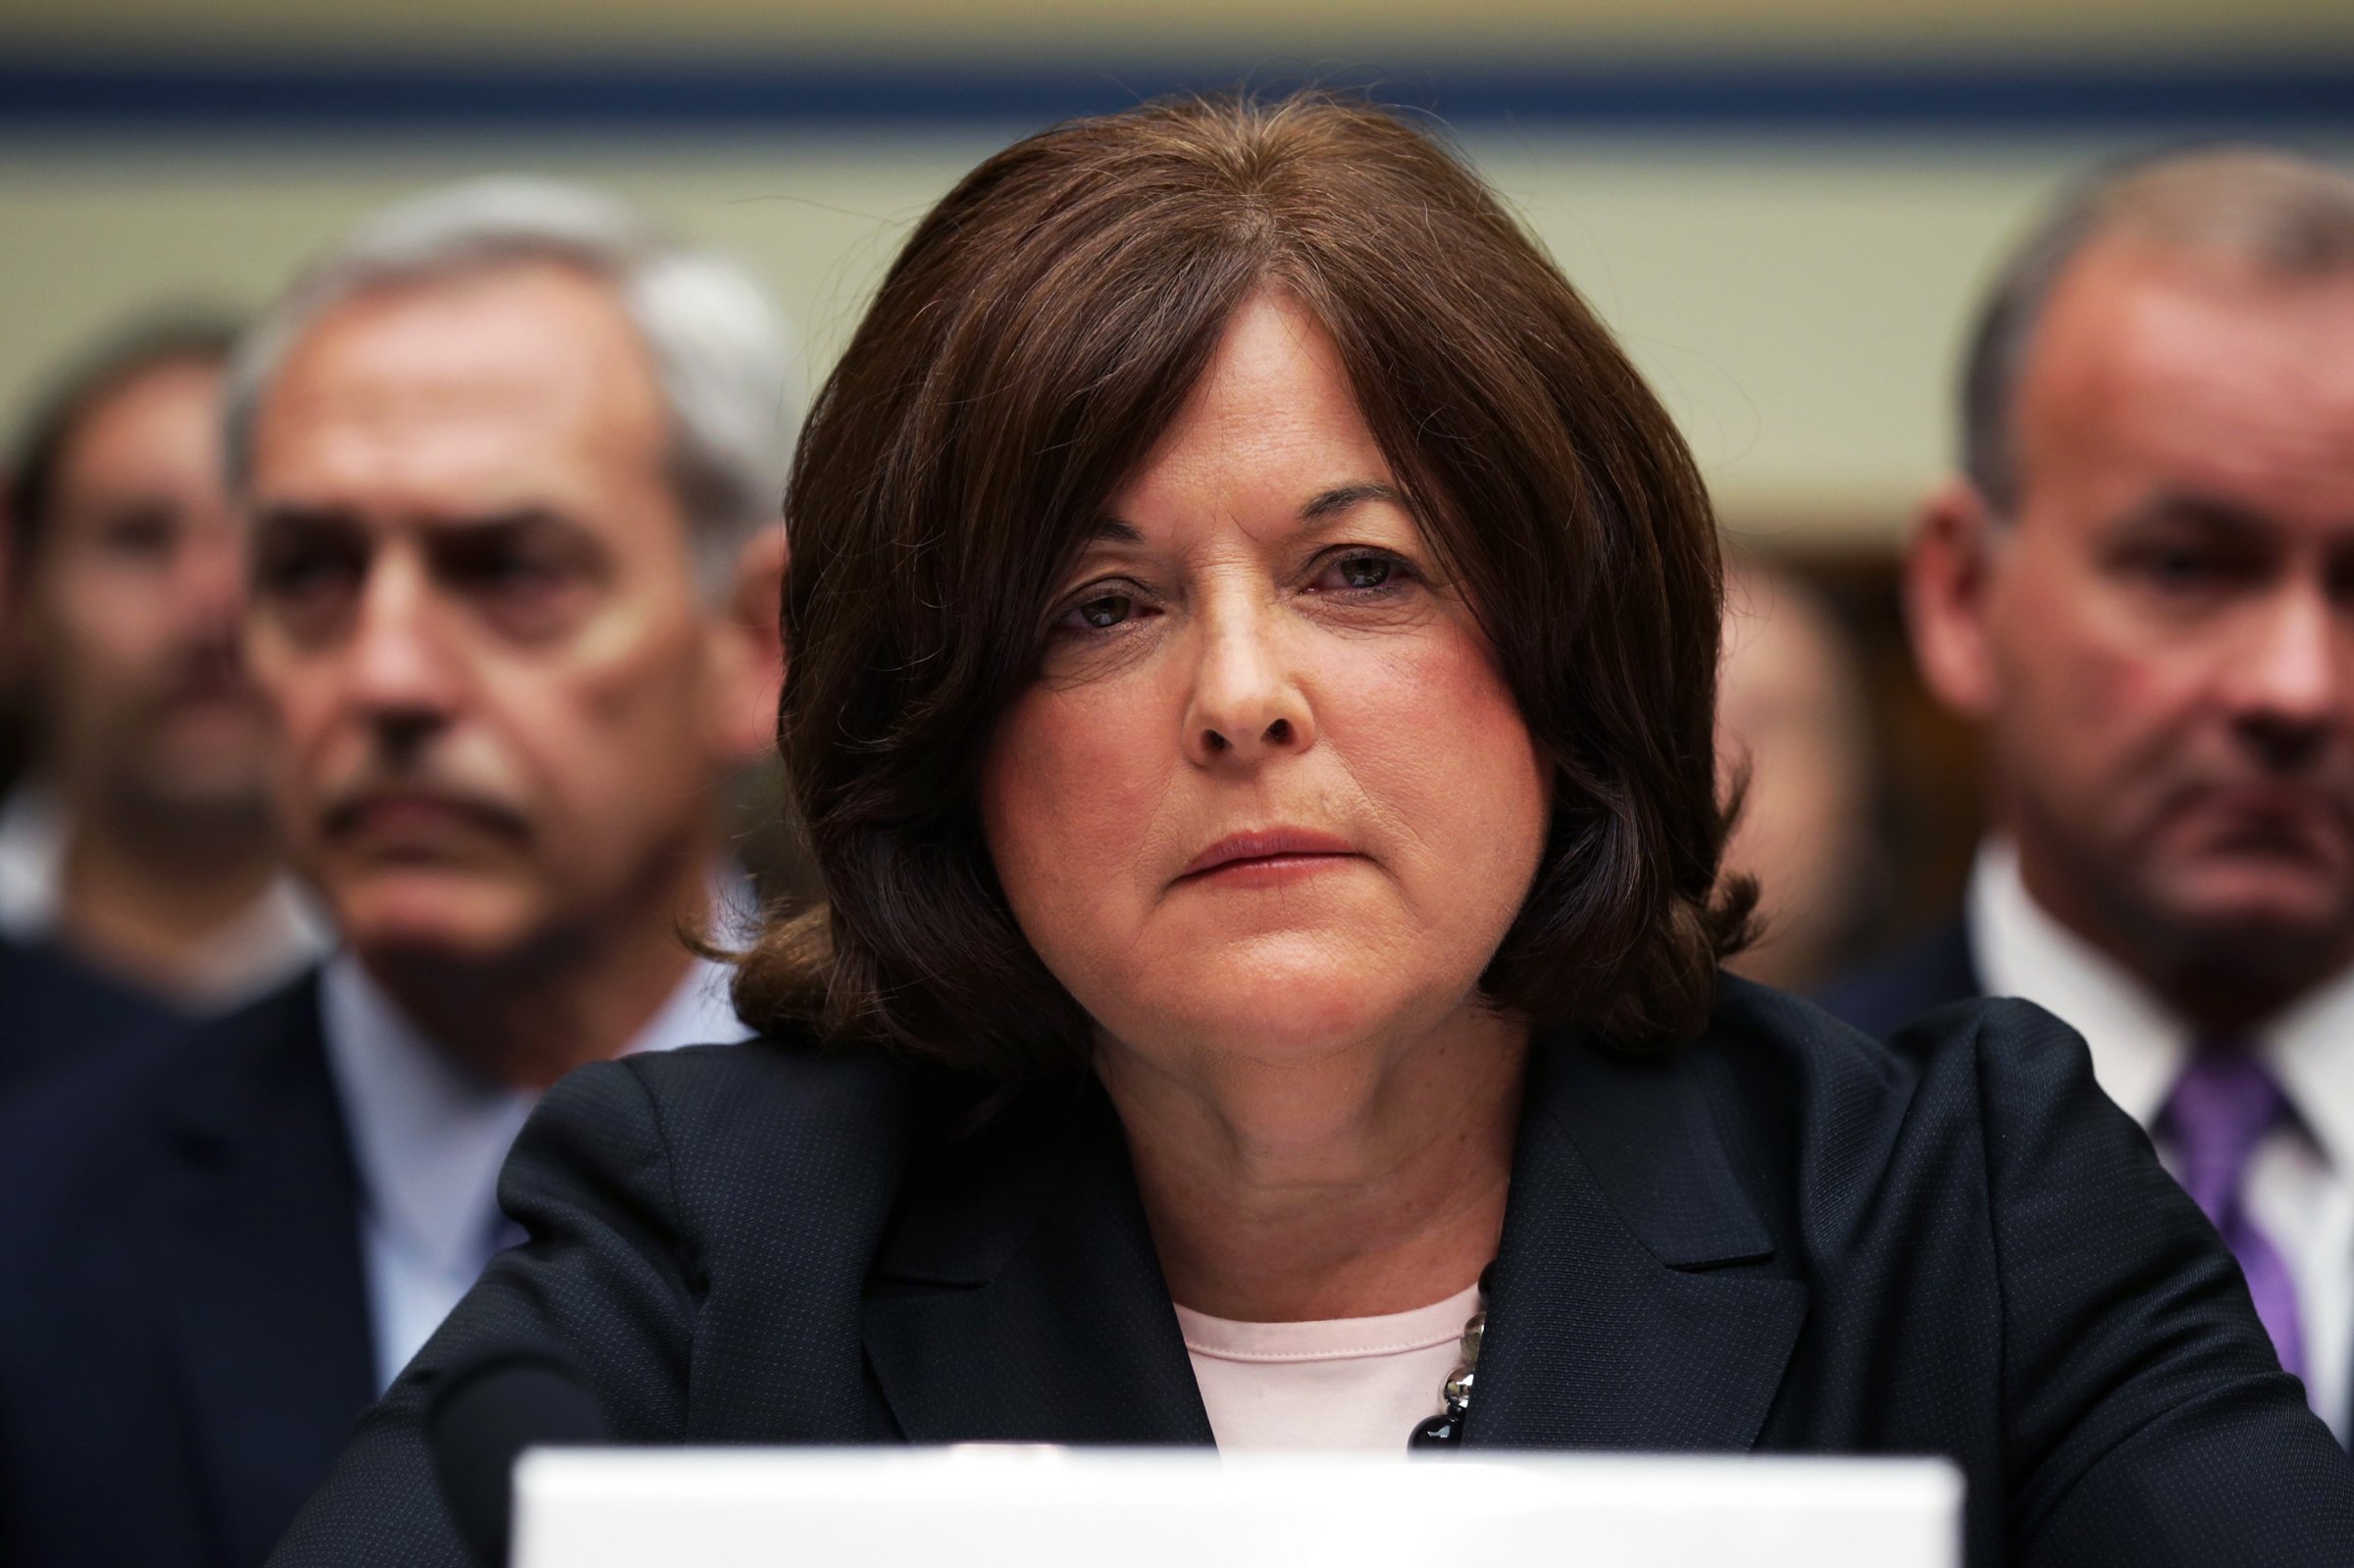 Secret Service Director Julia Pierson Testifies To House Committee On Recent Security Breaches At White House